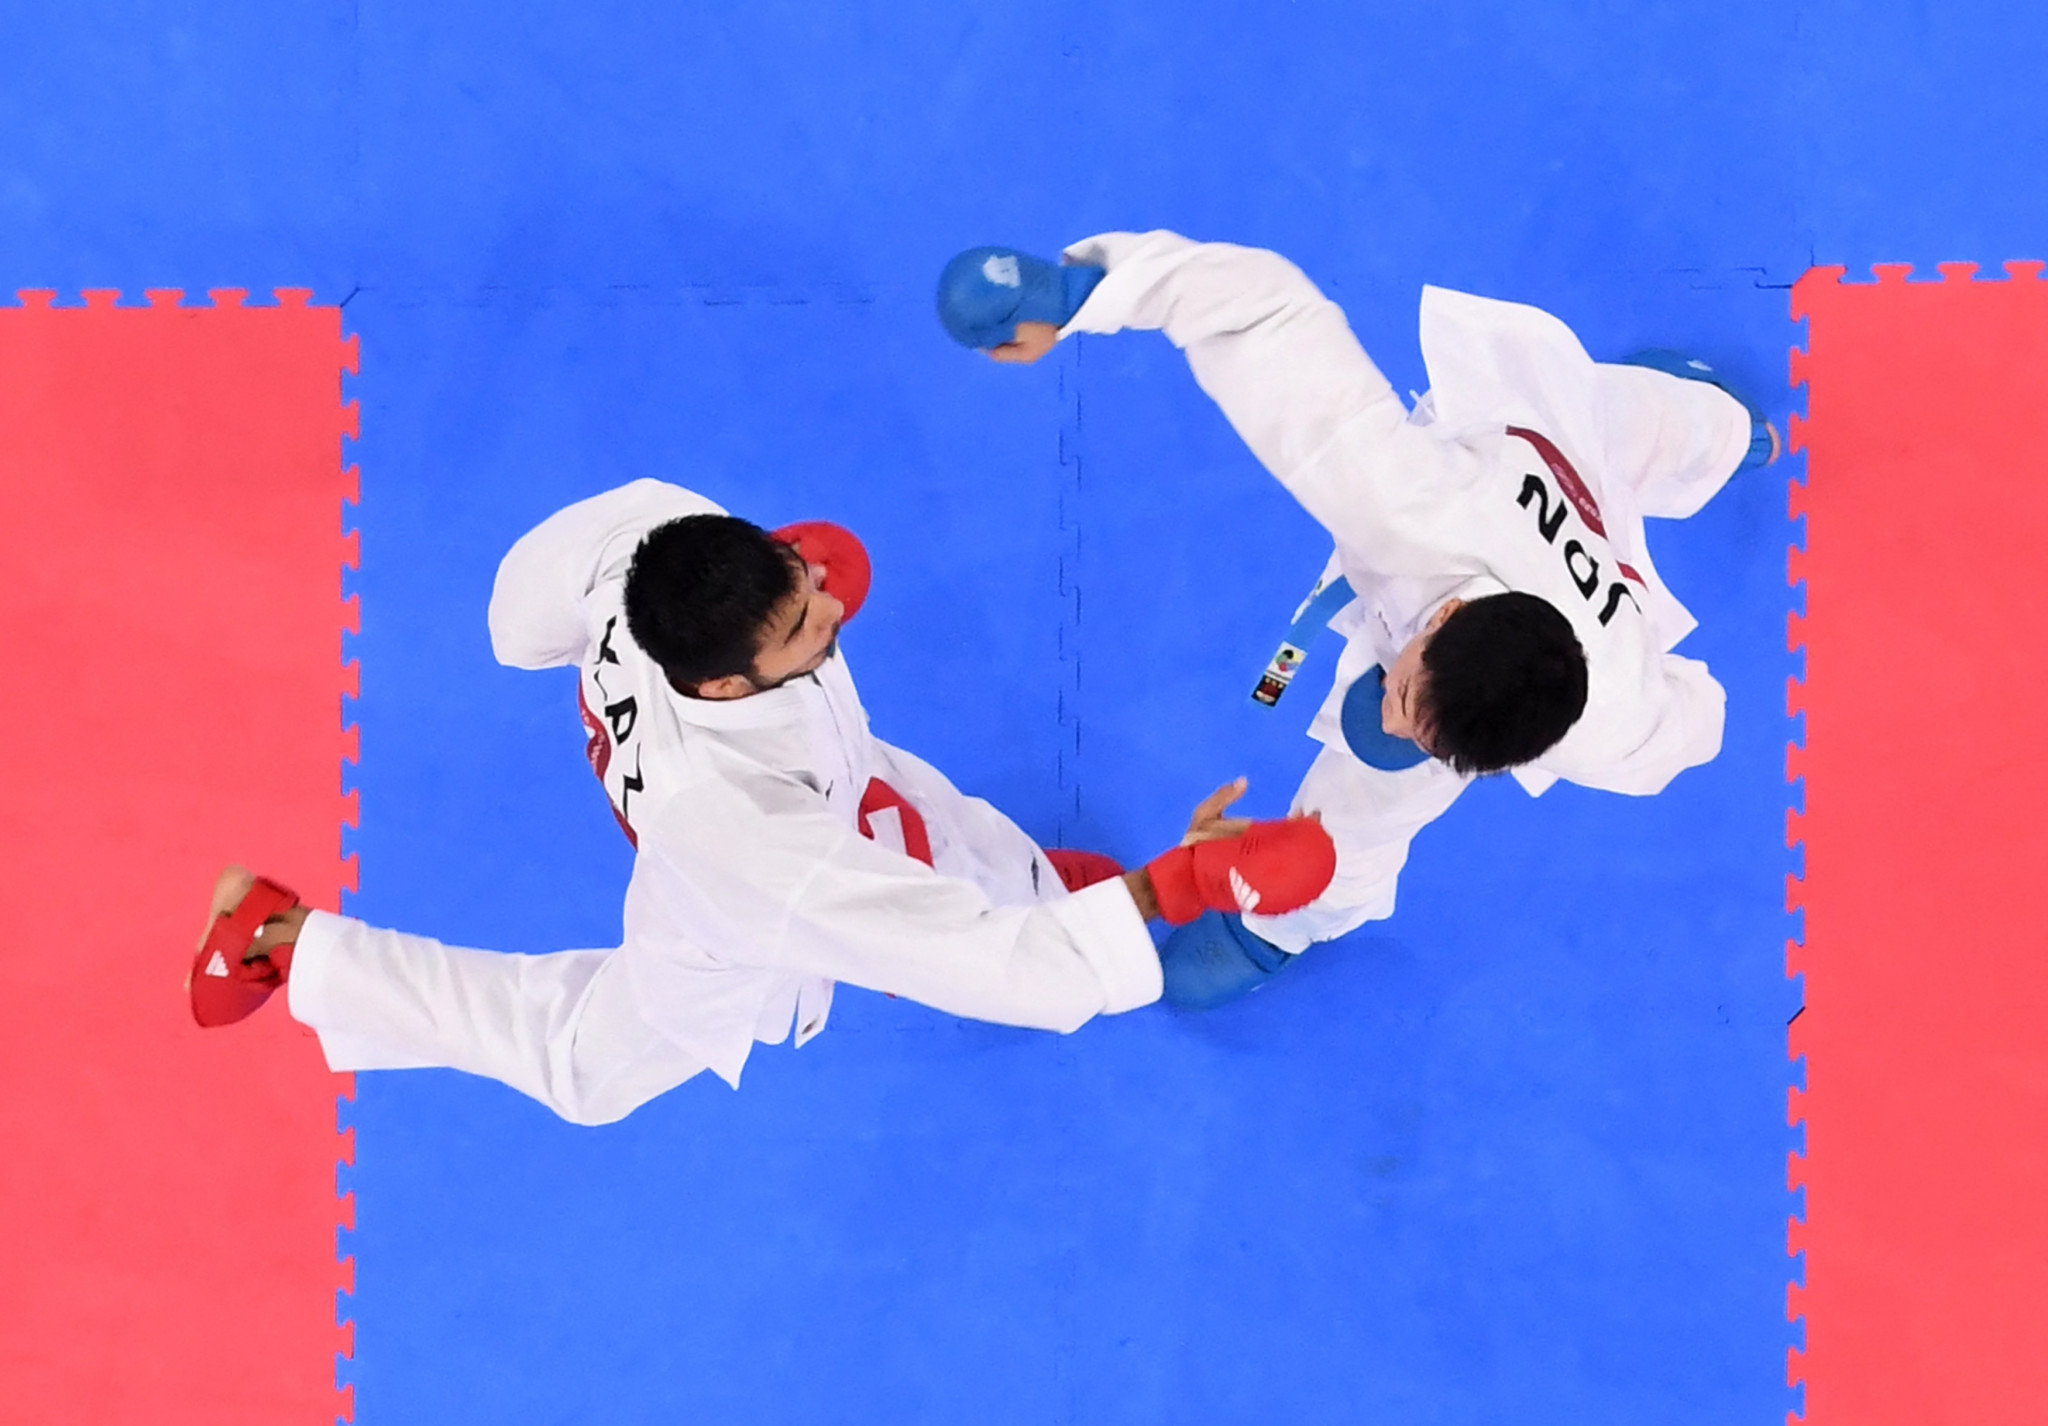 The Karate 1-Series A was staged in Konya with success for the host nation ©Getty Images